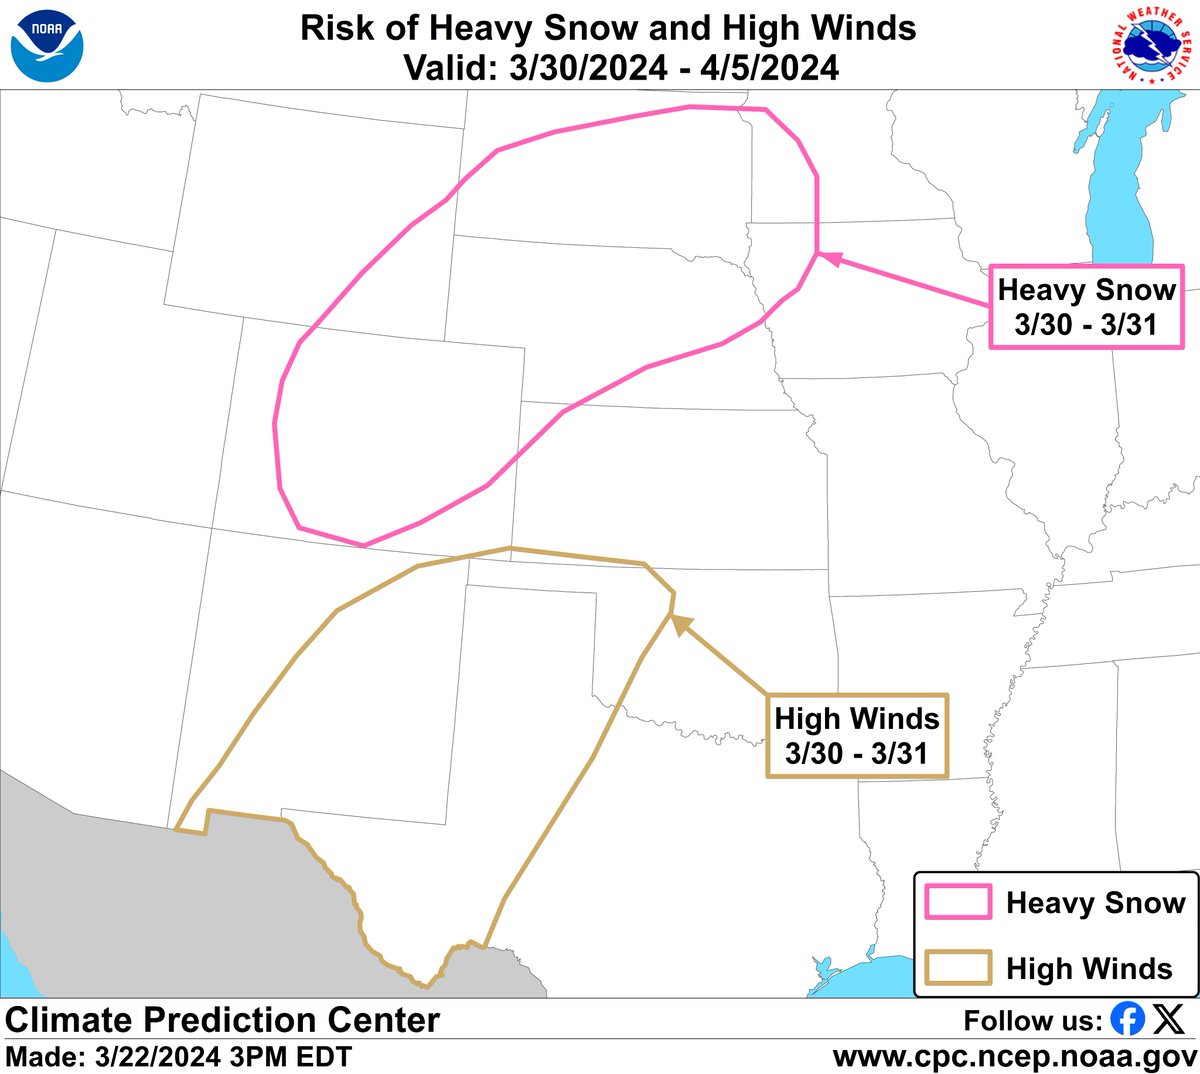 A storm tracking from the Southwest to Great Lakes supports increased risk of heavy snow for the Great Plains and Central Rockies, and high winds for parts of Texas, New Mexico, and Oklahoma, late March. High winds may support increased risk of wildfires.